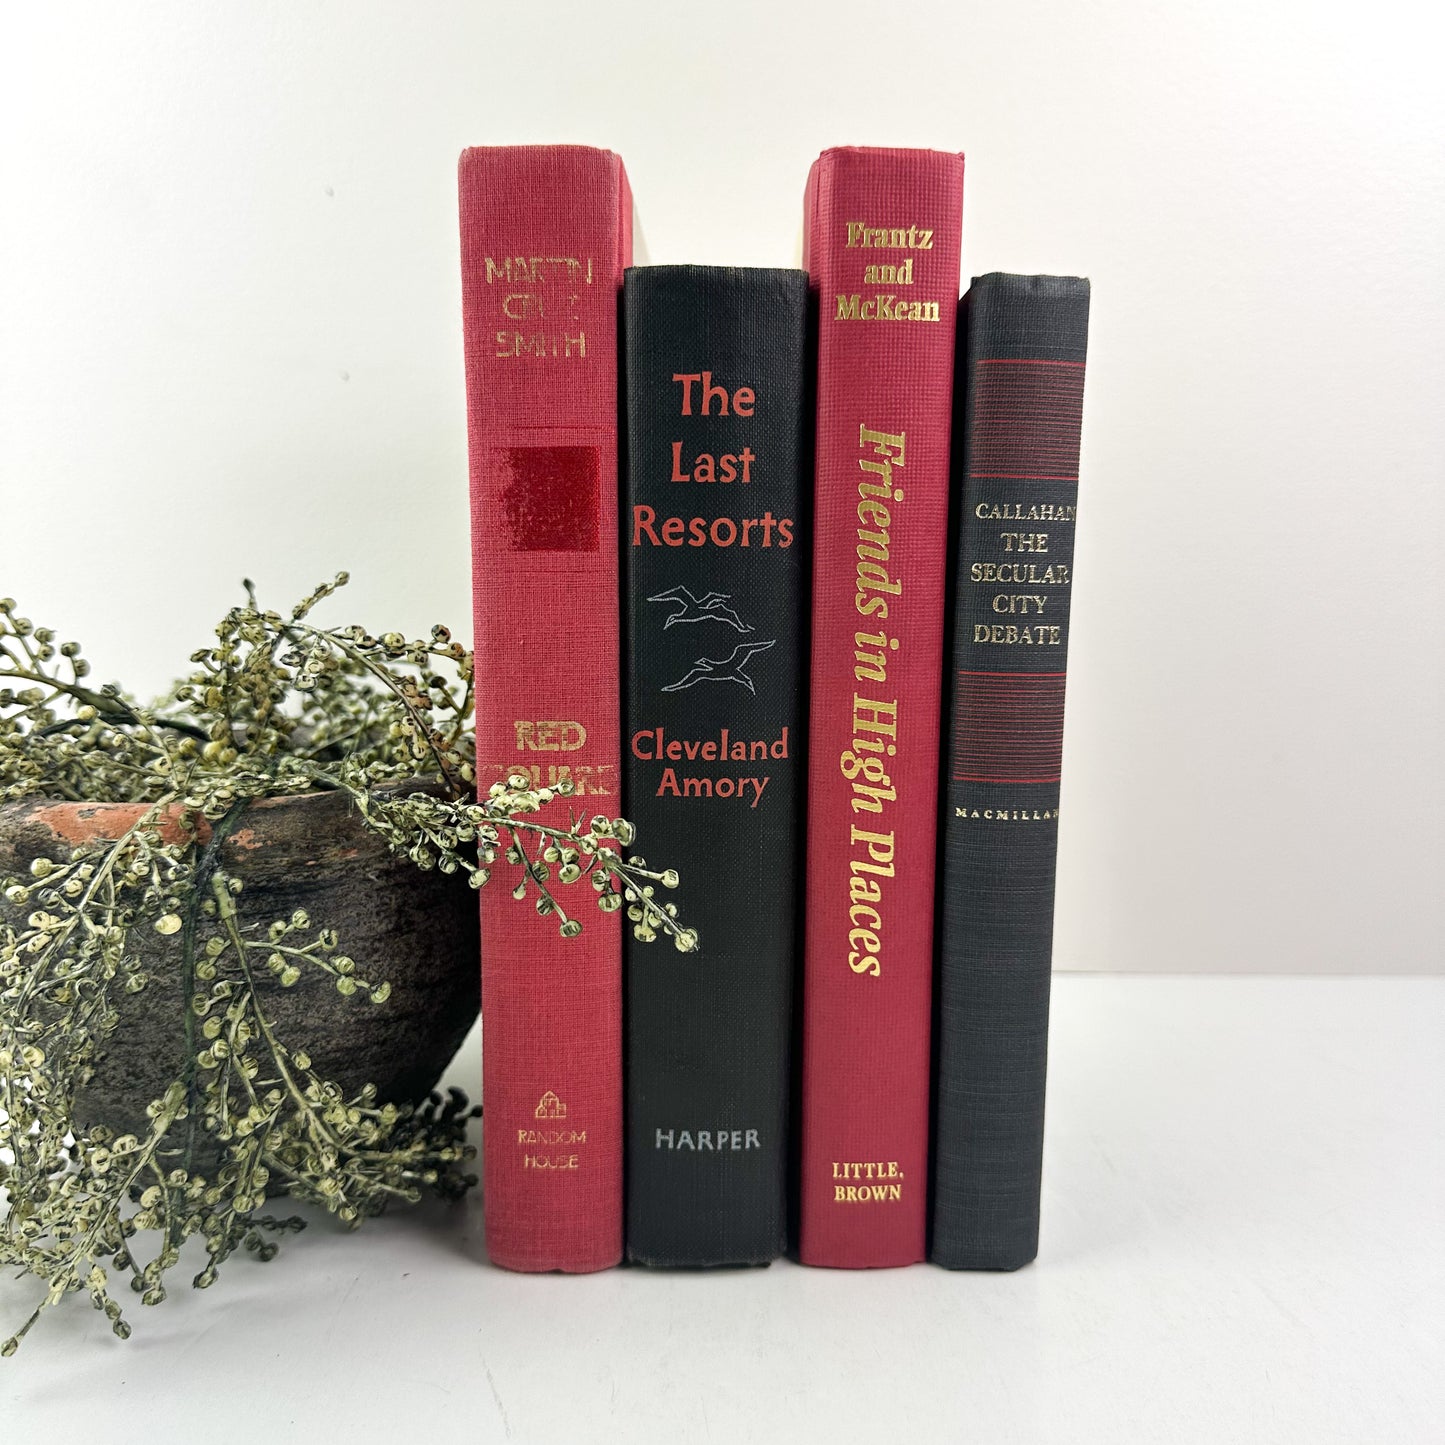 Red and Black Decorative Book Set